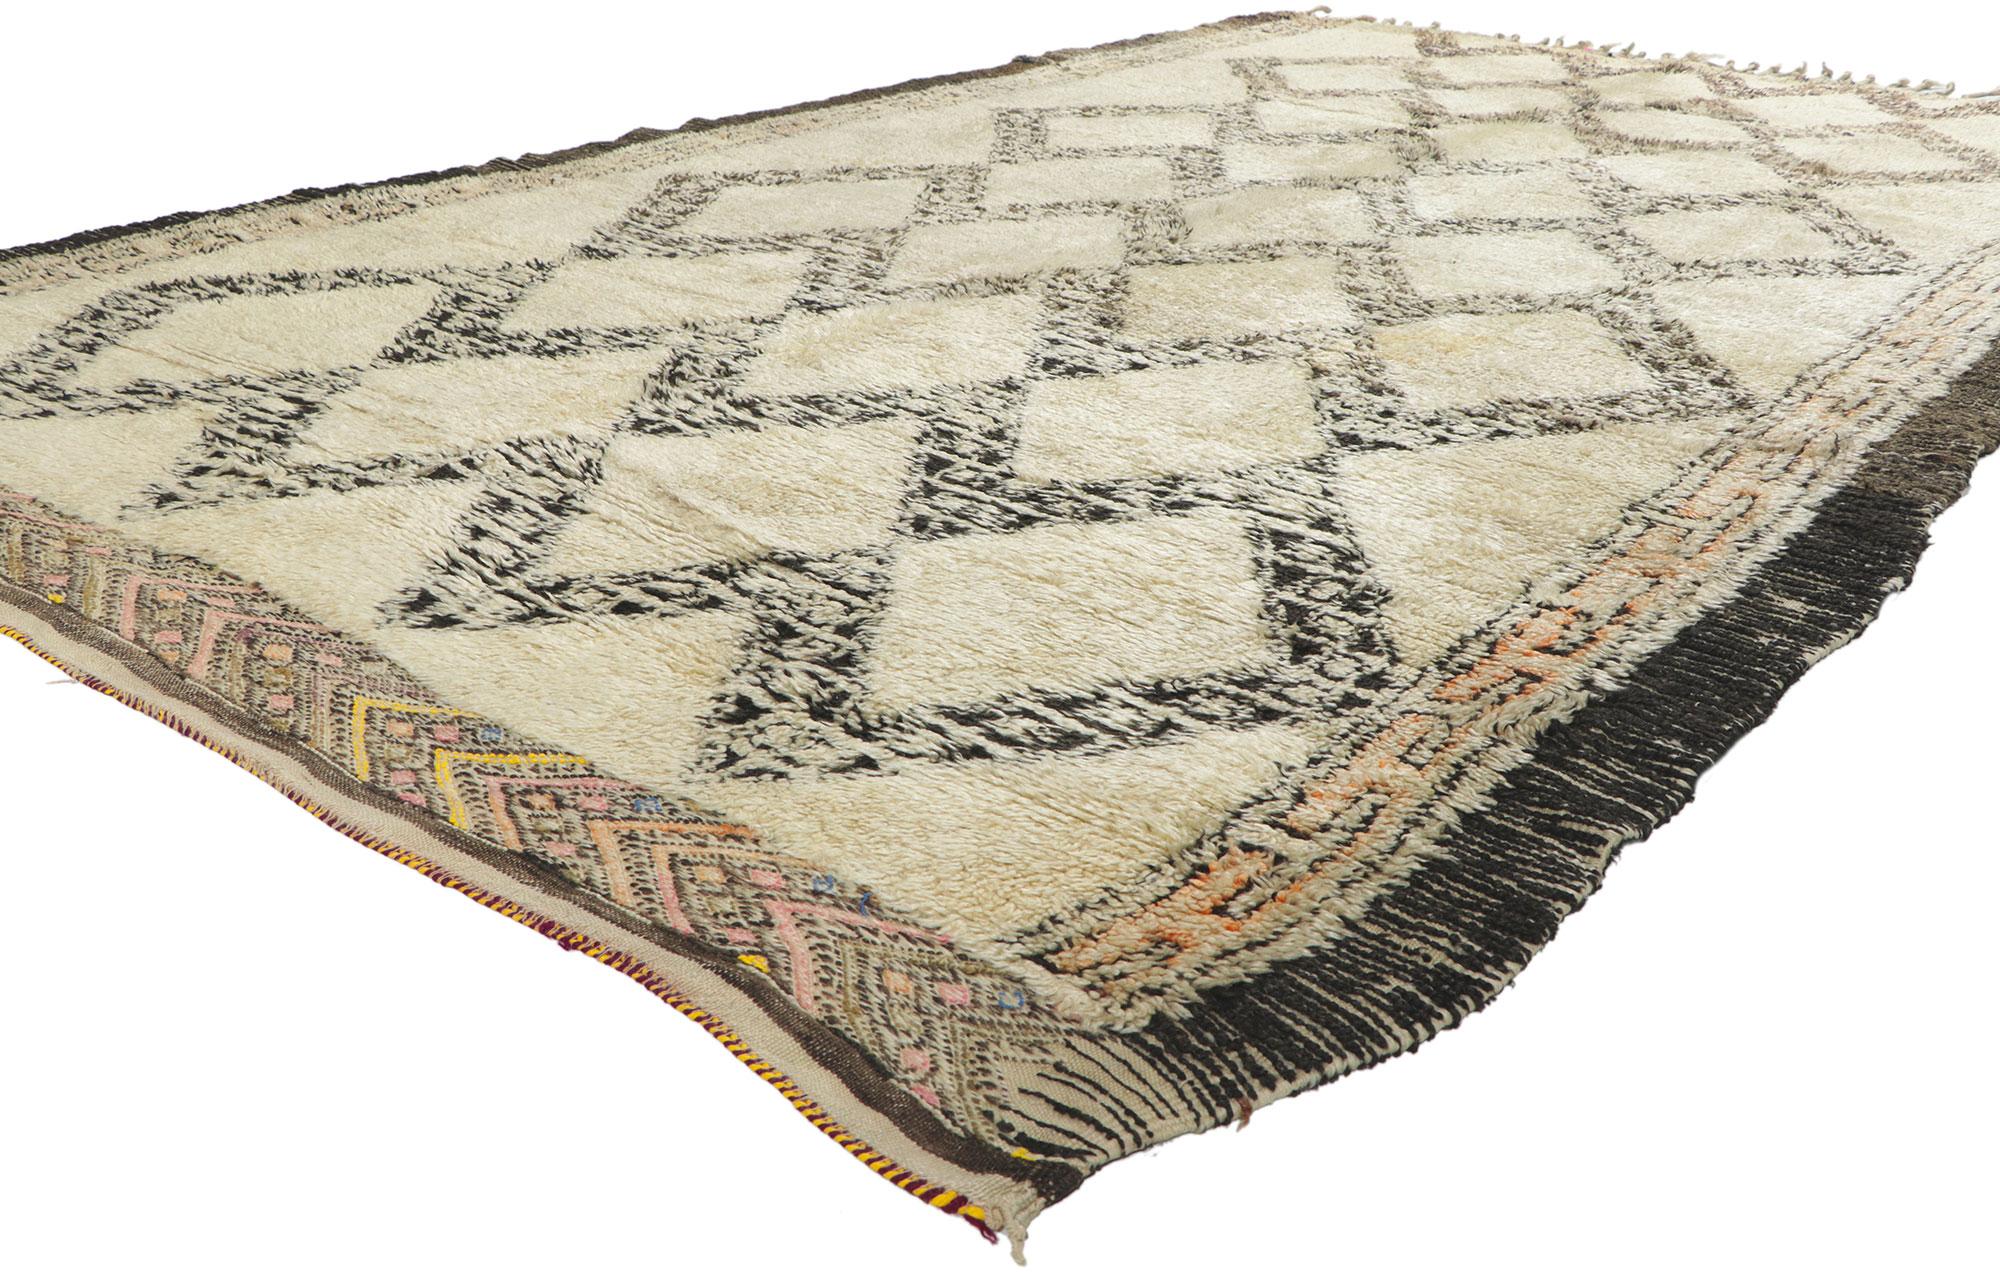 78372 vintage Moroccan Beni Ourain rug, 06'05 x 10'10. With its Midcentury Modern style, incredible detail and texture, this hand knotted wool vintage Beni Ourain Moroccan rug is a captivating vision of woven beauty. The eye-catching diamond trellis